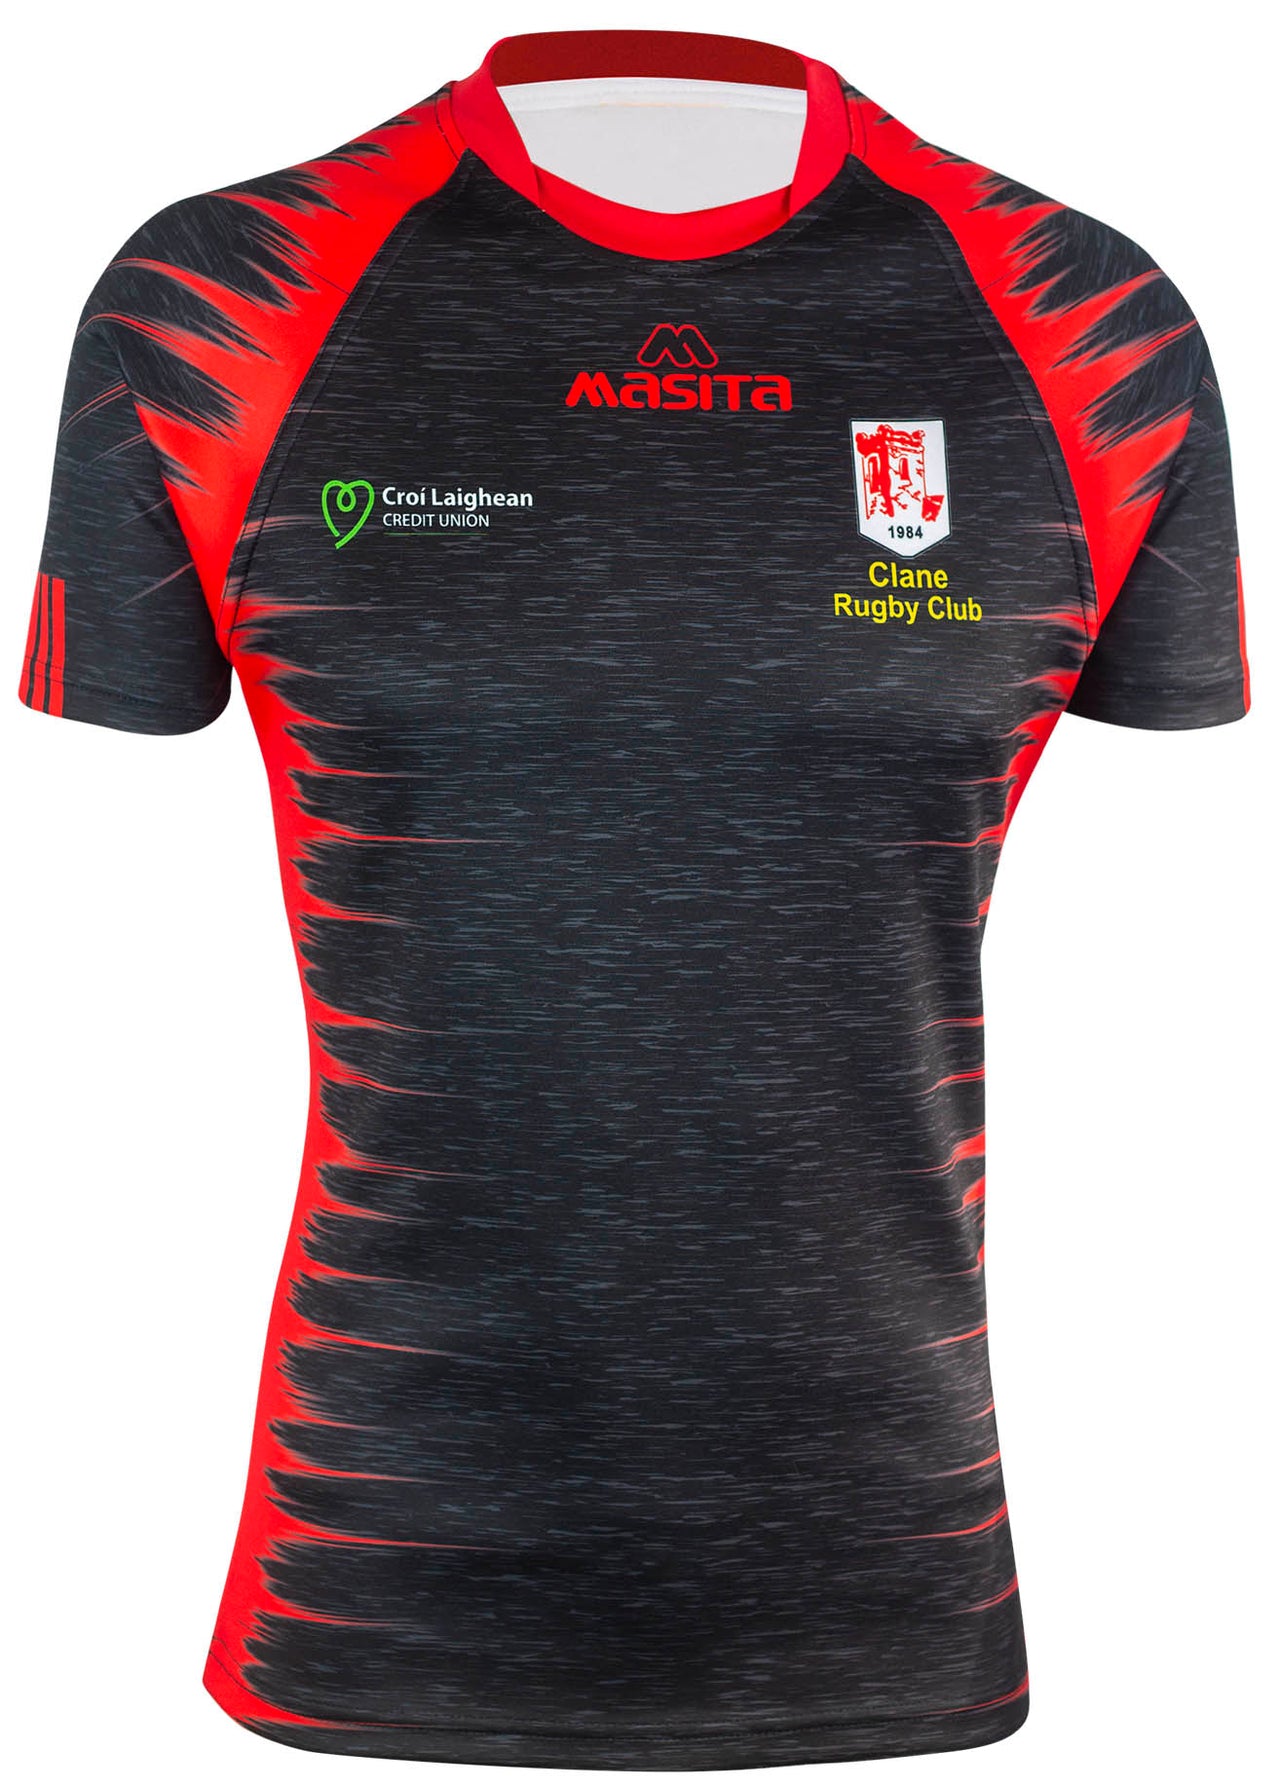 Clane Rugby Training Jersey Unisex Fit Adult